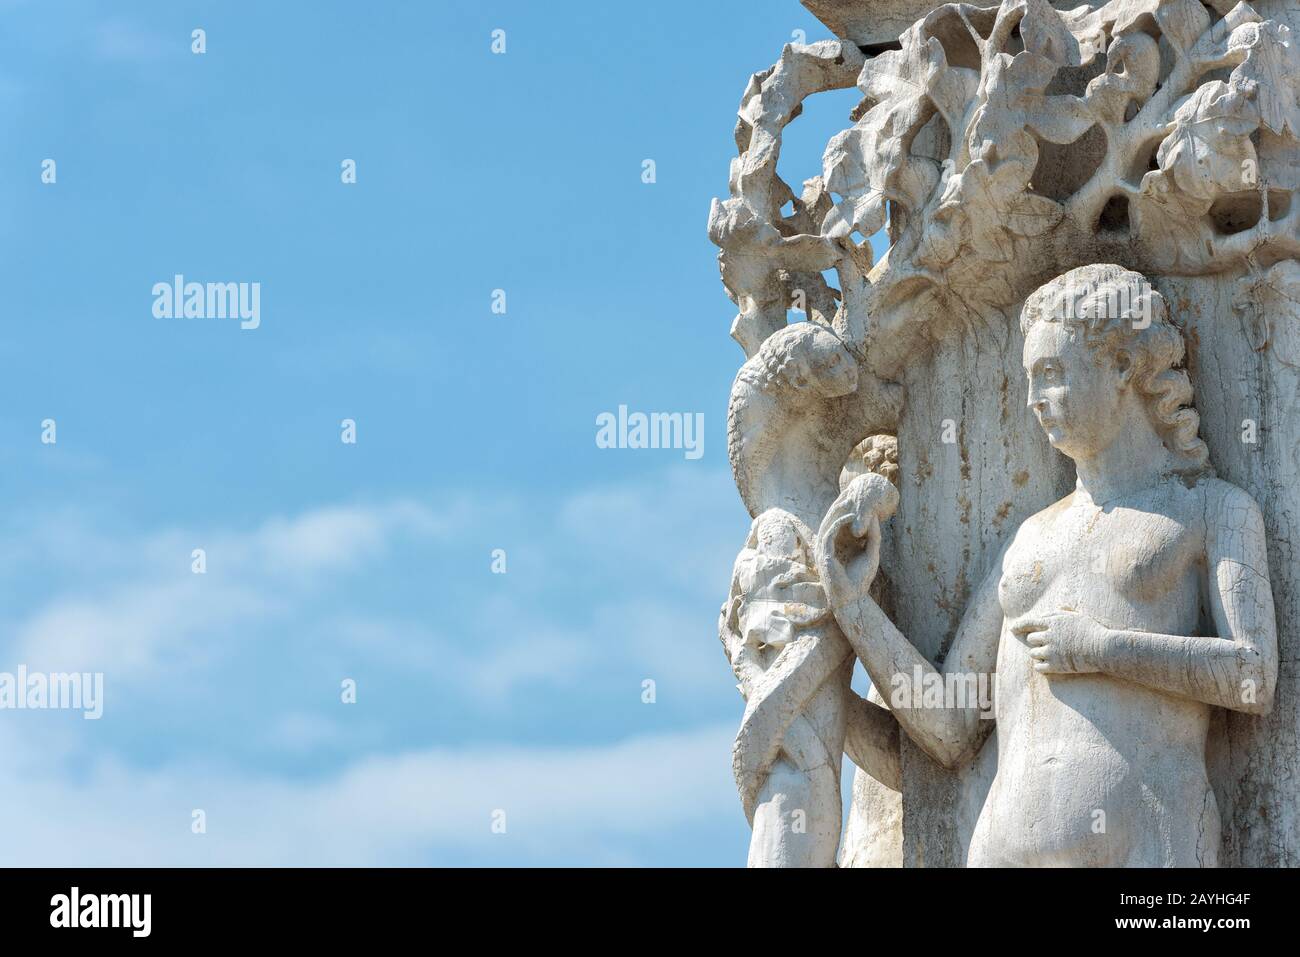 Doge's Palace (Palazzo Ducale) detail, Venice, Italy. It is one of the main landmarks of Venice. Statue of biblical Eve on the Doge's Palace facade. R Stock Photo